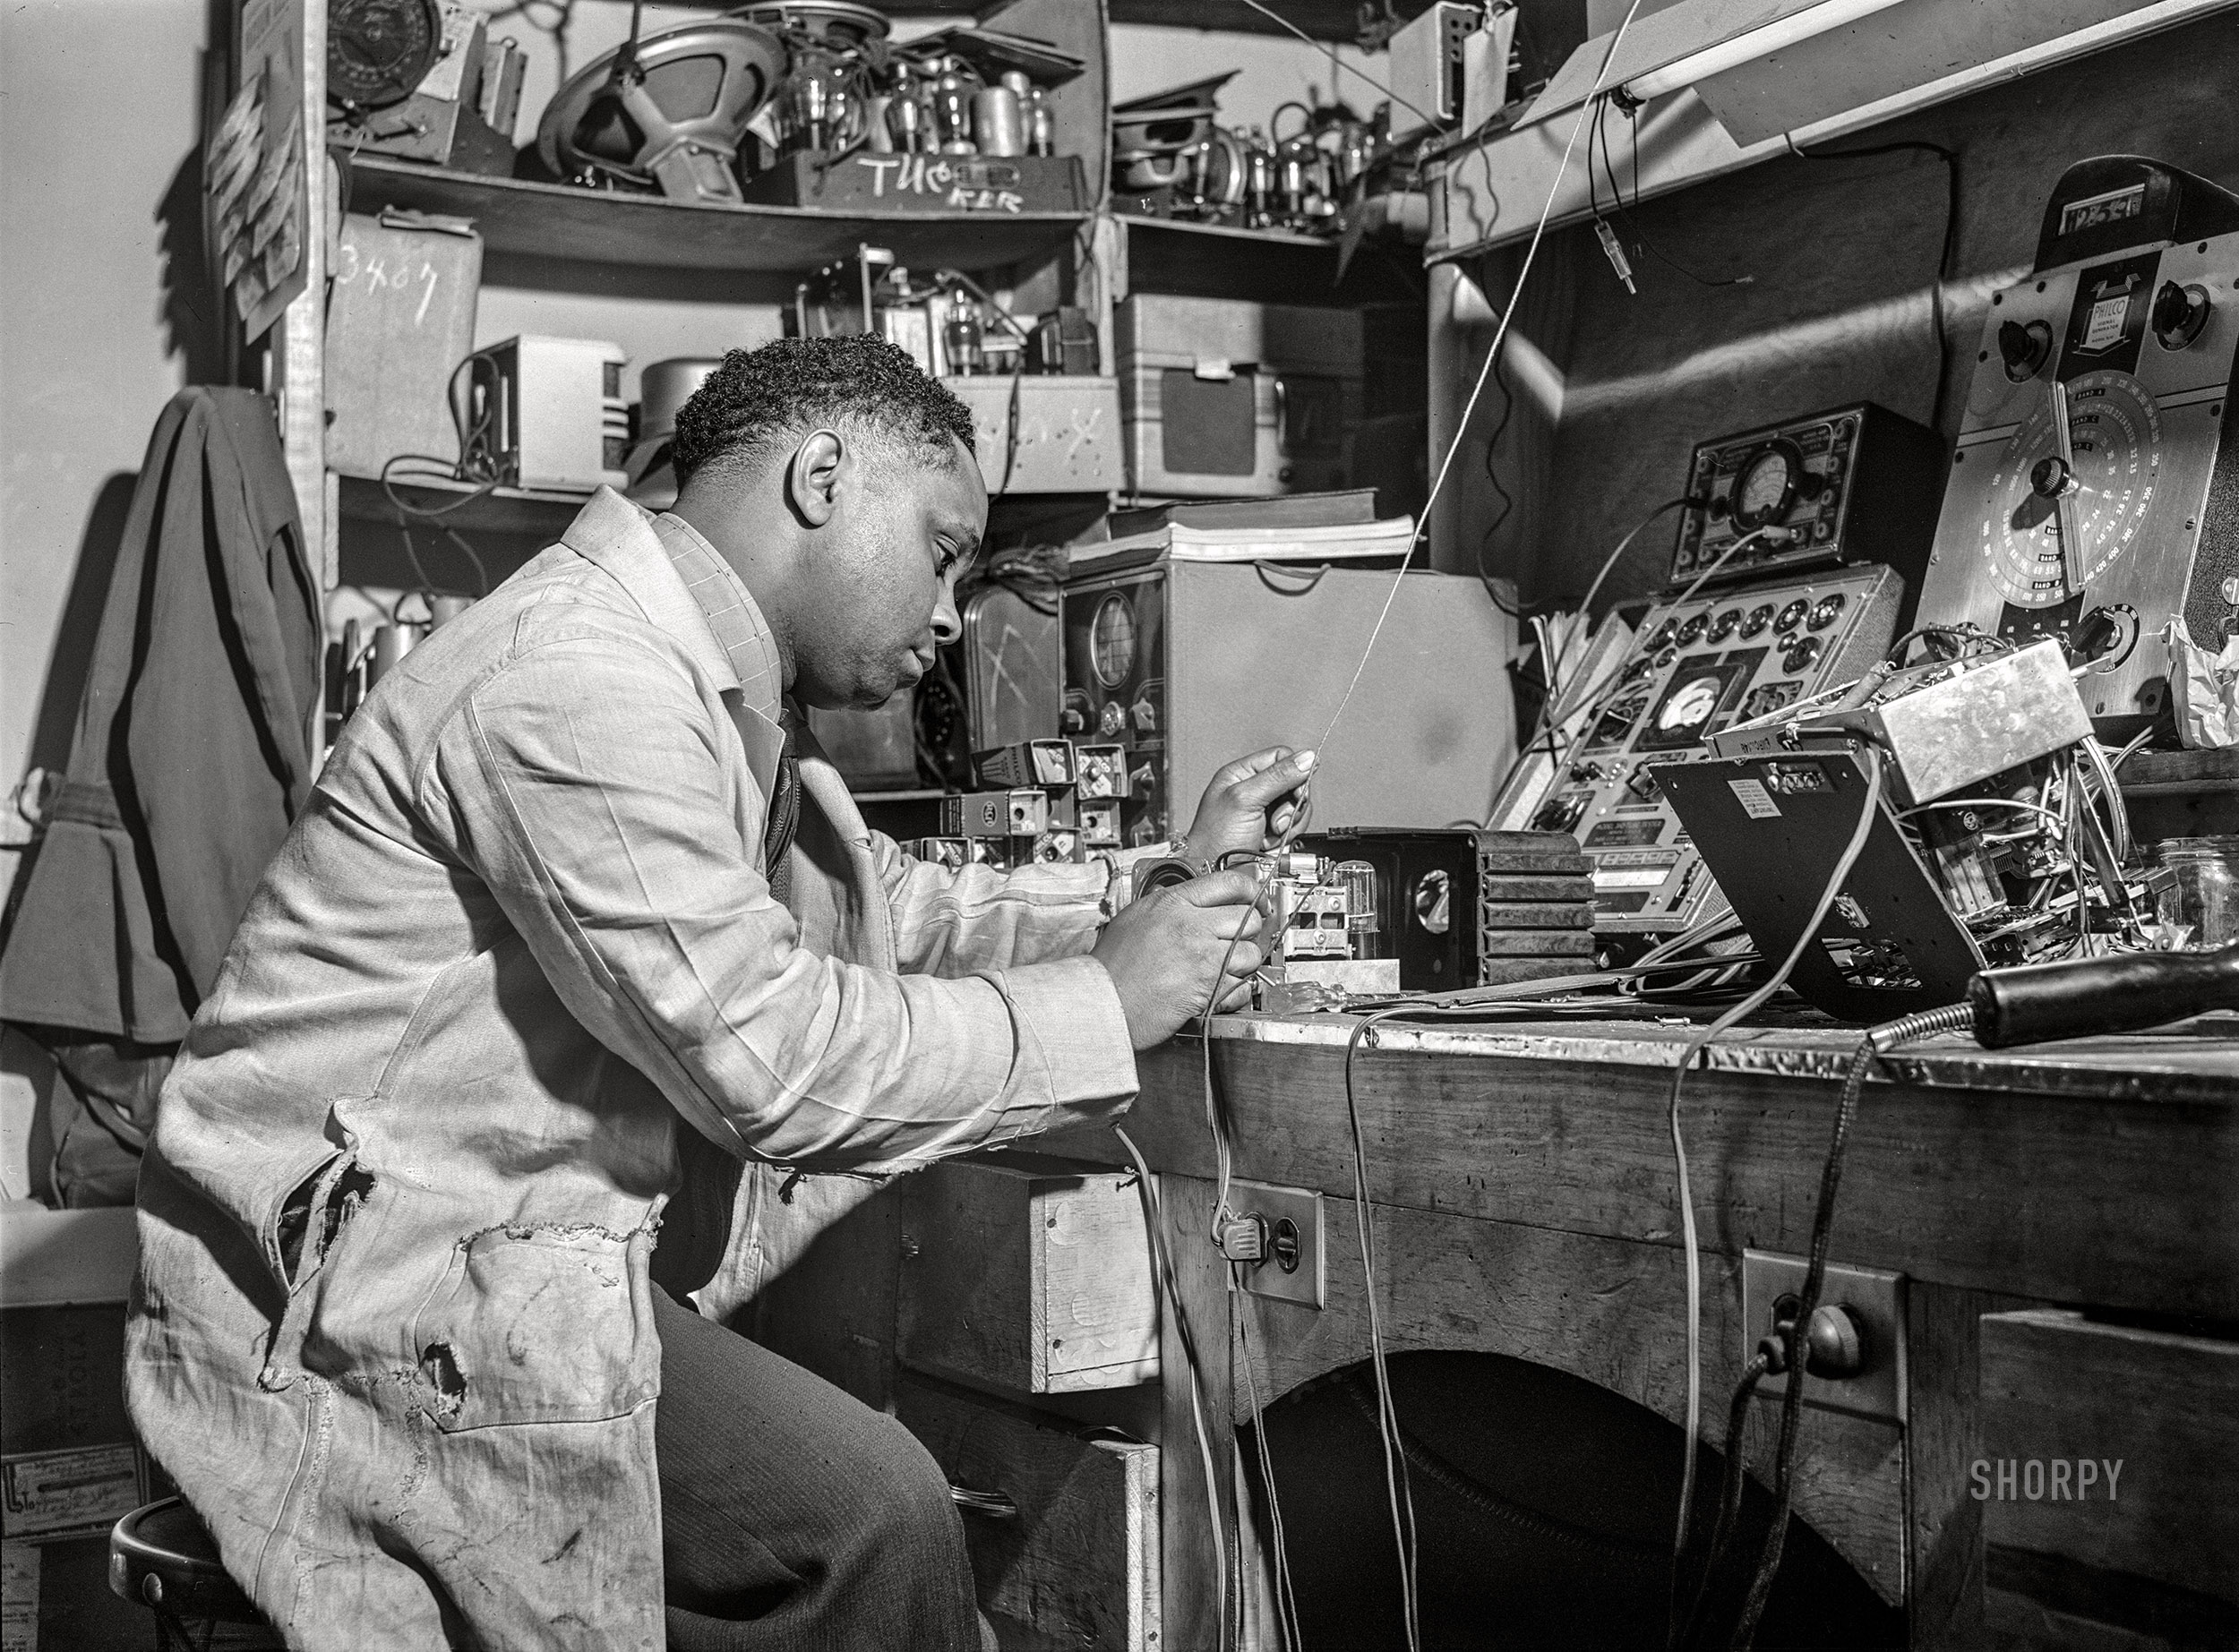 April 1942. "Chicago, Illinois -- Mr. Thomas Dorsey, radio technician, in William H. Green's radio and electrical store. Mr. Dorsey is an expert radio repairman and studied at the Tilden technical school in Chicago." Medium format acetate negative by Jack Delano. View full size.